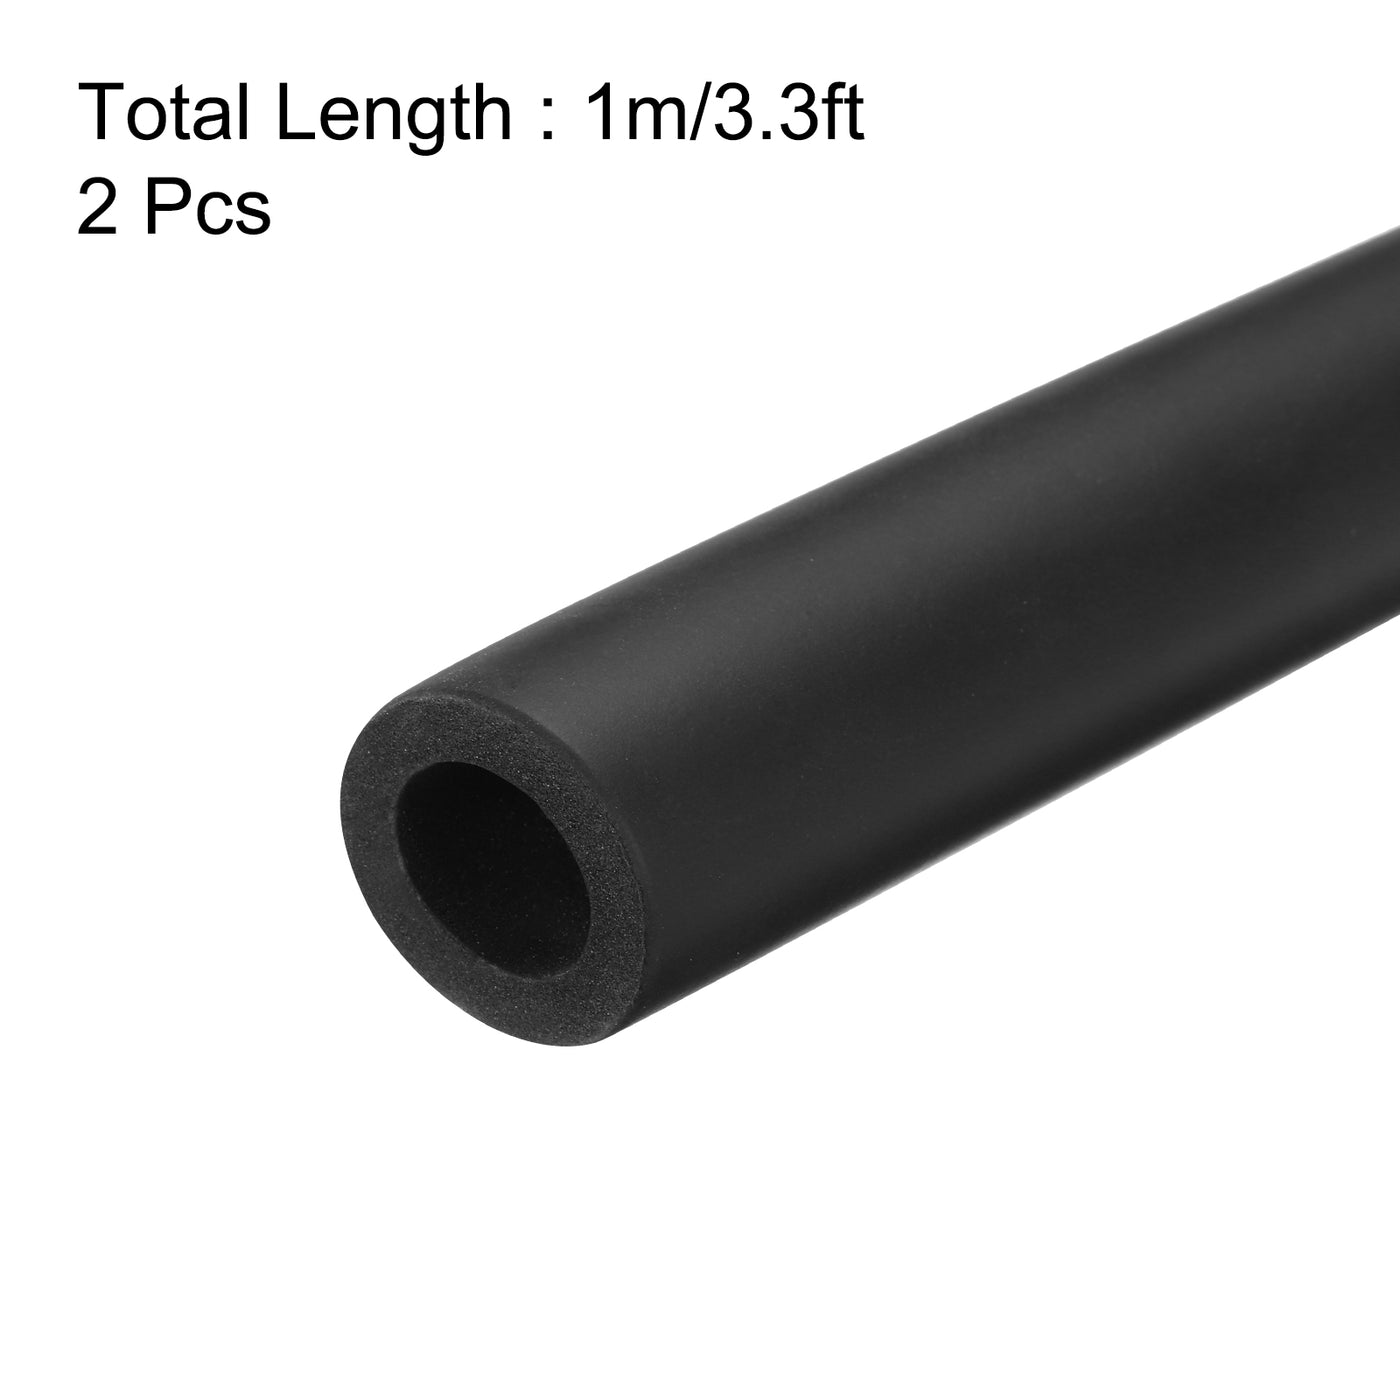 uxcell Uxcell 2pcs 3.3ft Pipe Insulation Tube 5/8 Inch(16mm) ID 26mm OD Foam Tubing for Handle Grip Support, Black